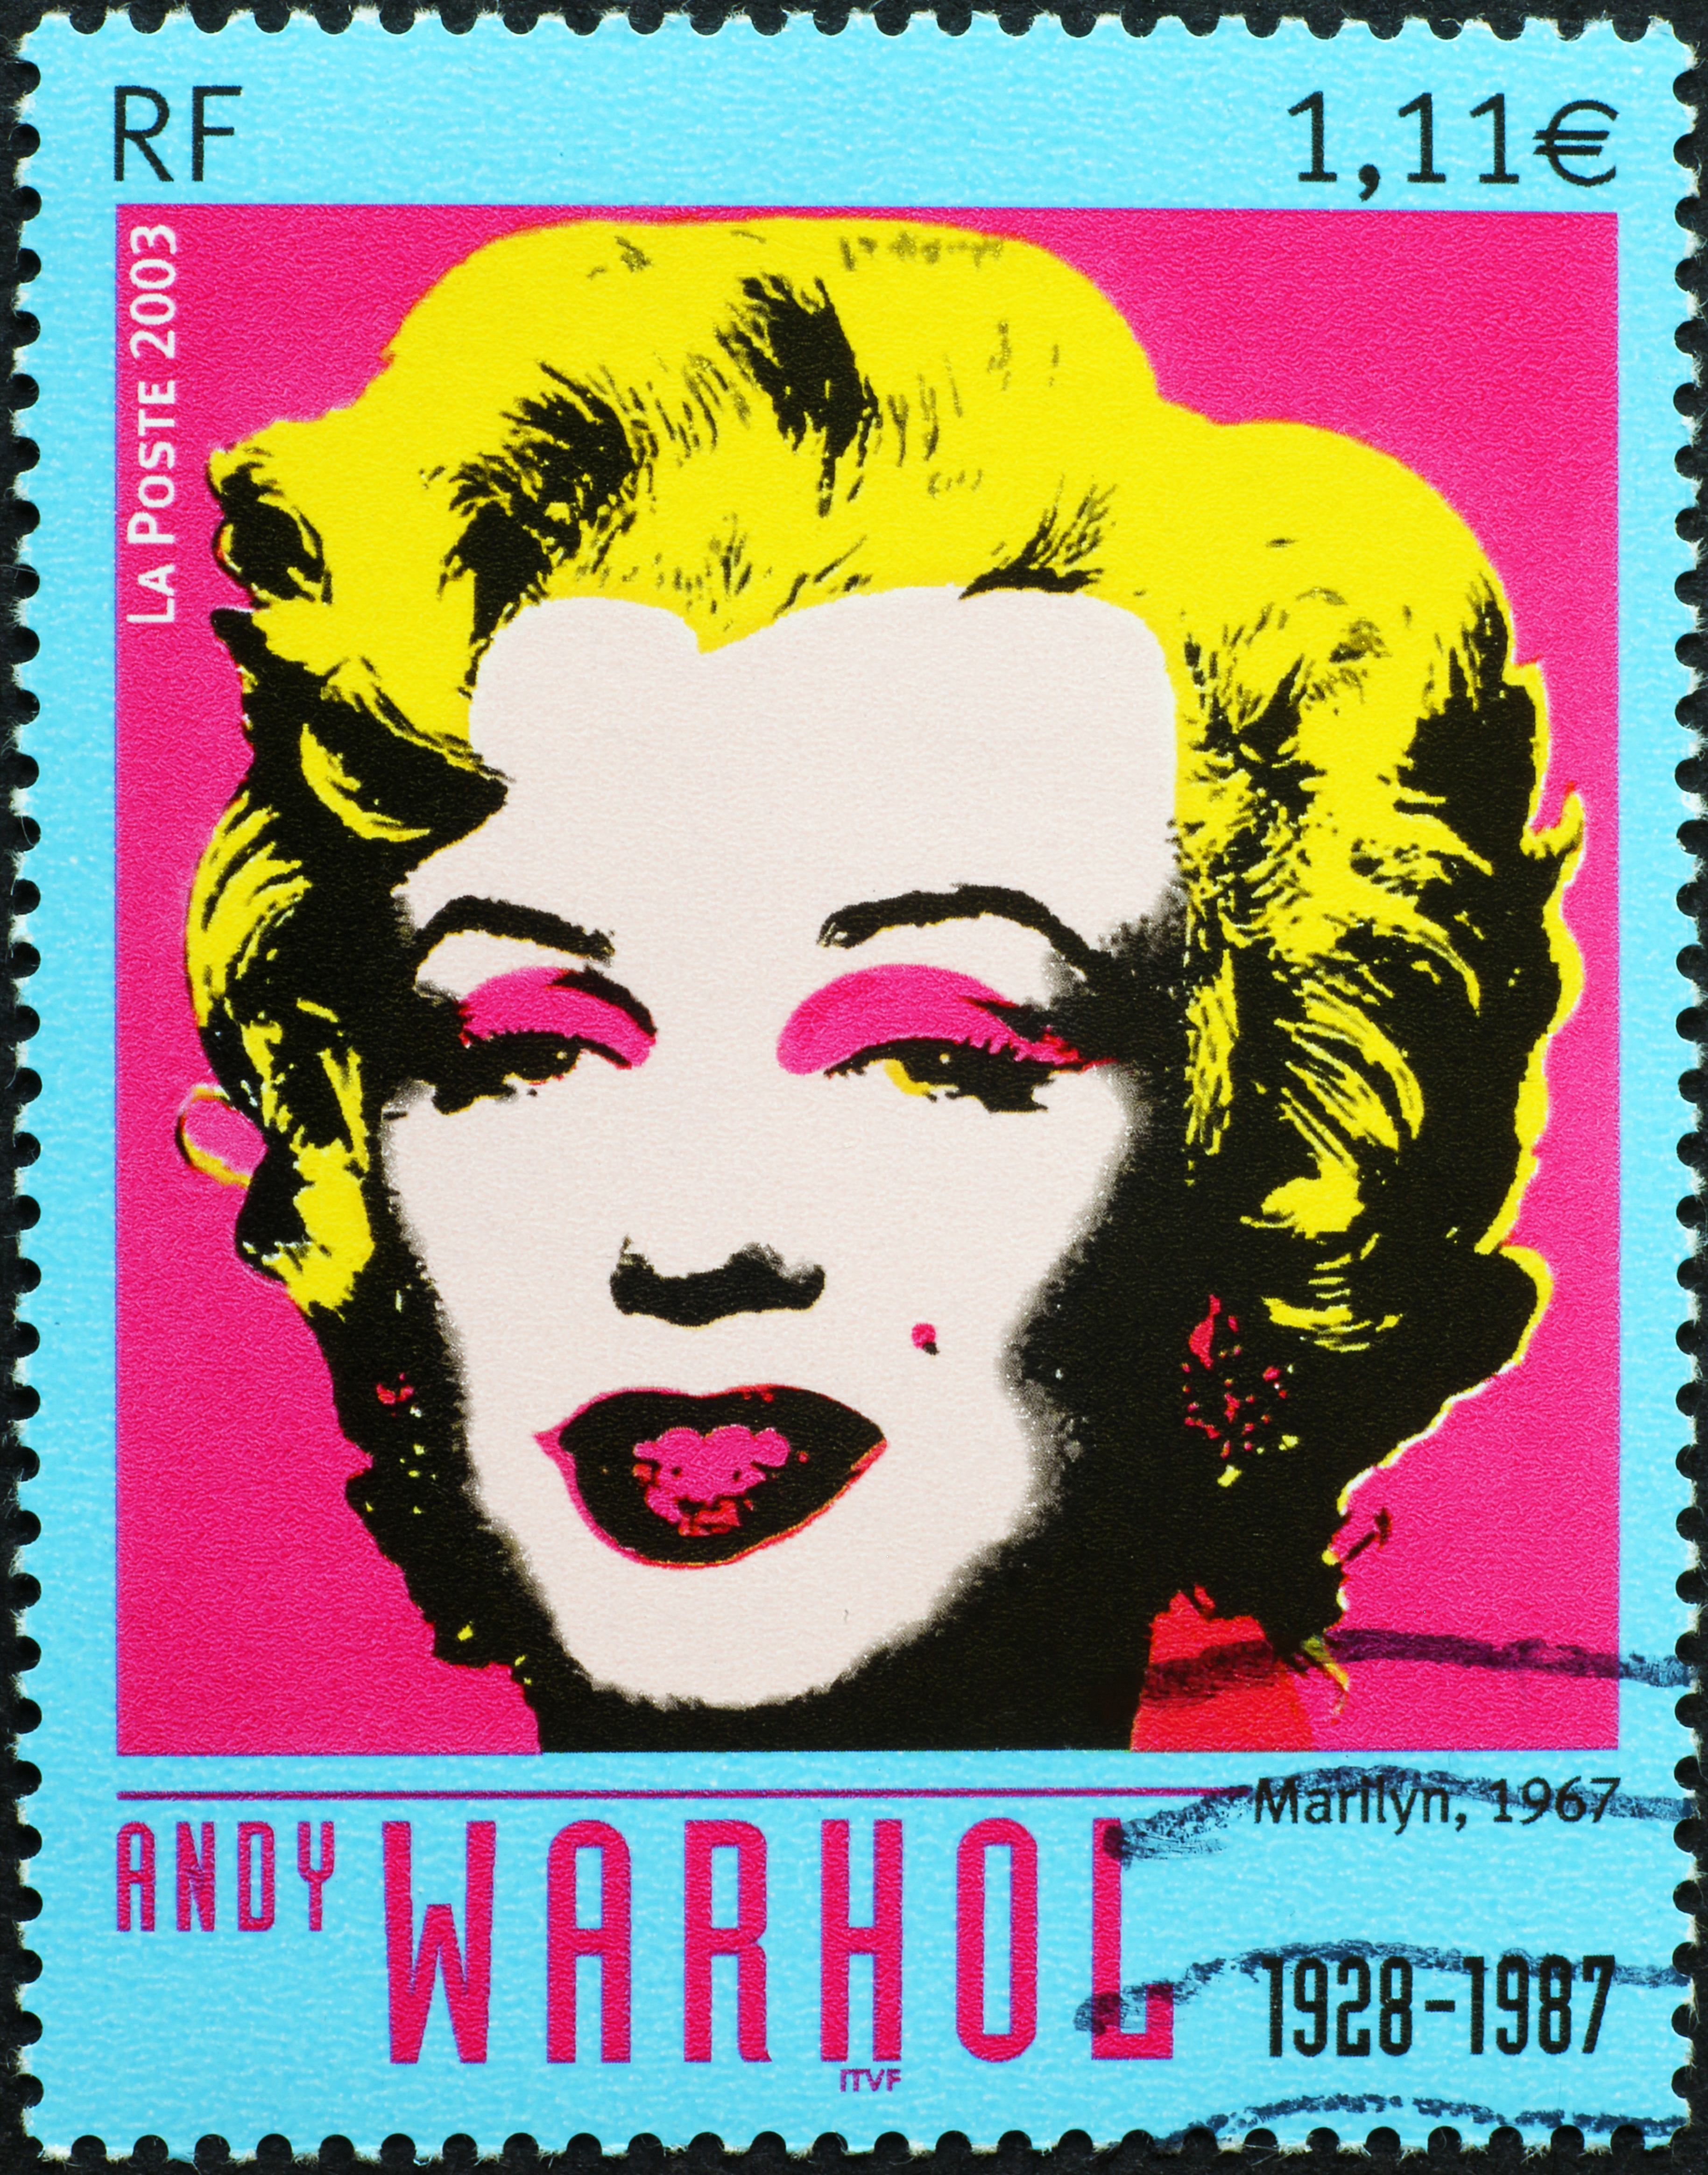 Marilyn Monroe Lithograph by Andy Warhol